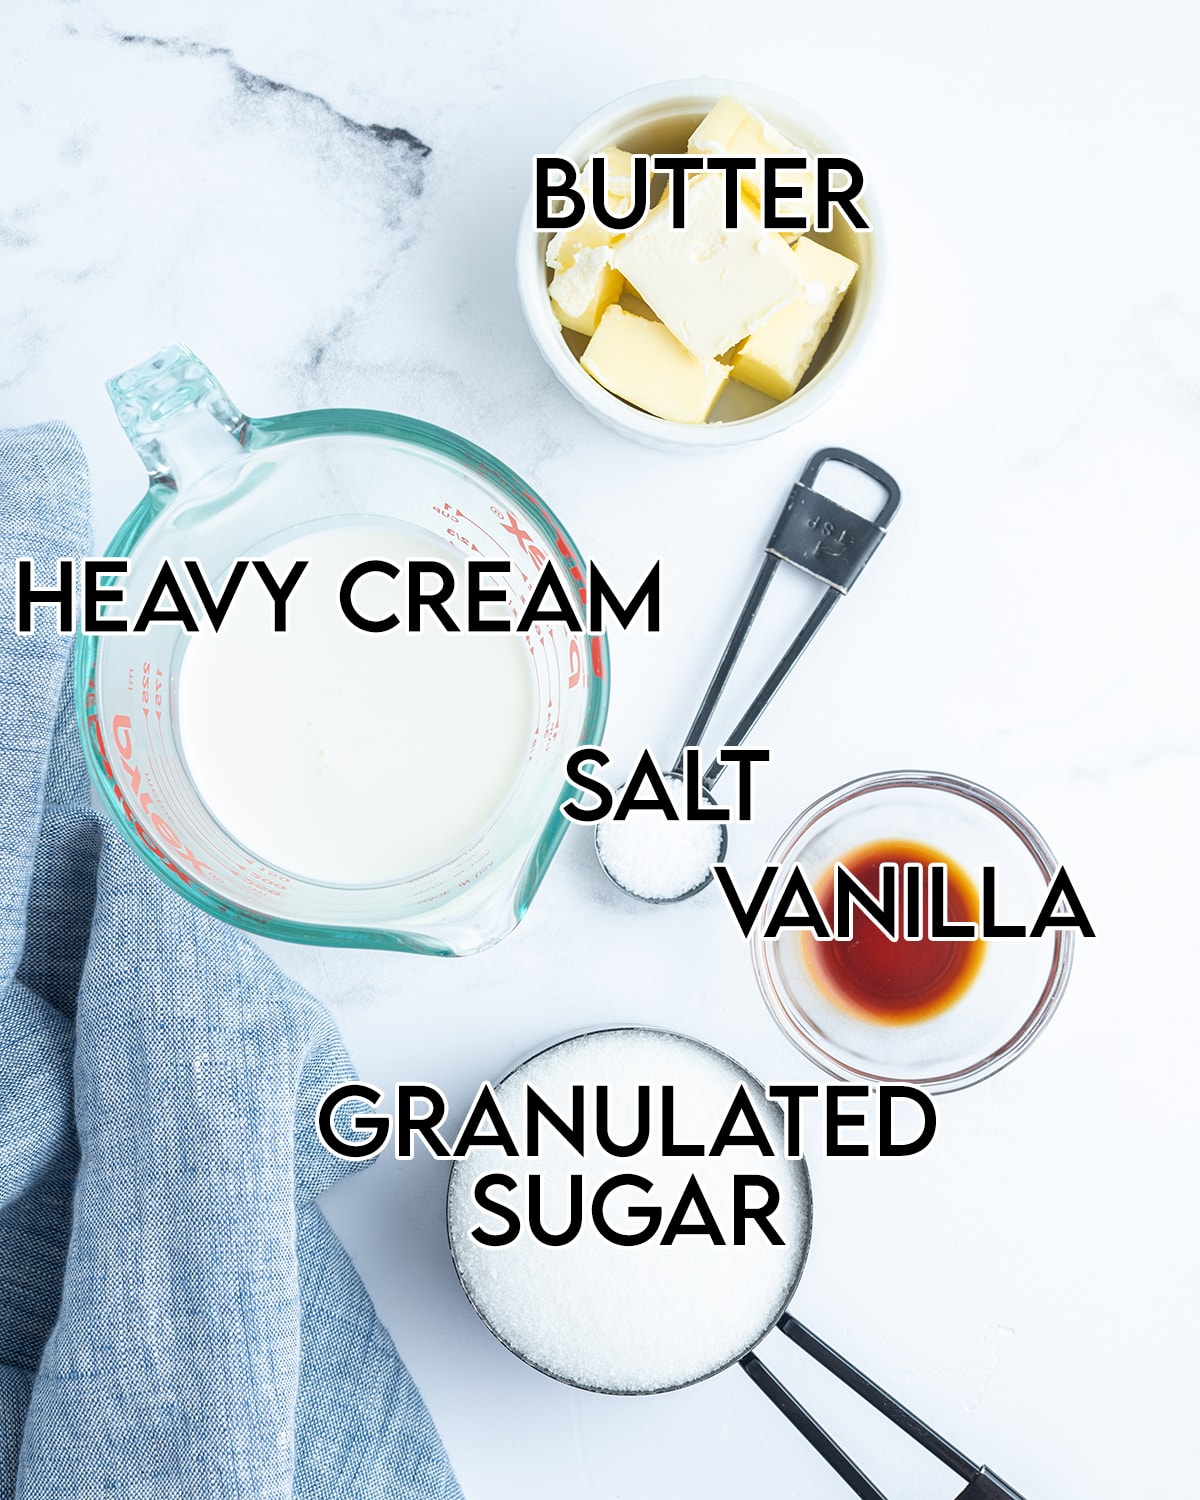 An overhead photo of the ingredients needed to make salted caramel sauce, heavy cream, butter, salt, vanilla, and granulated sugar.